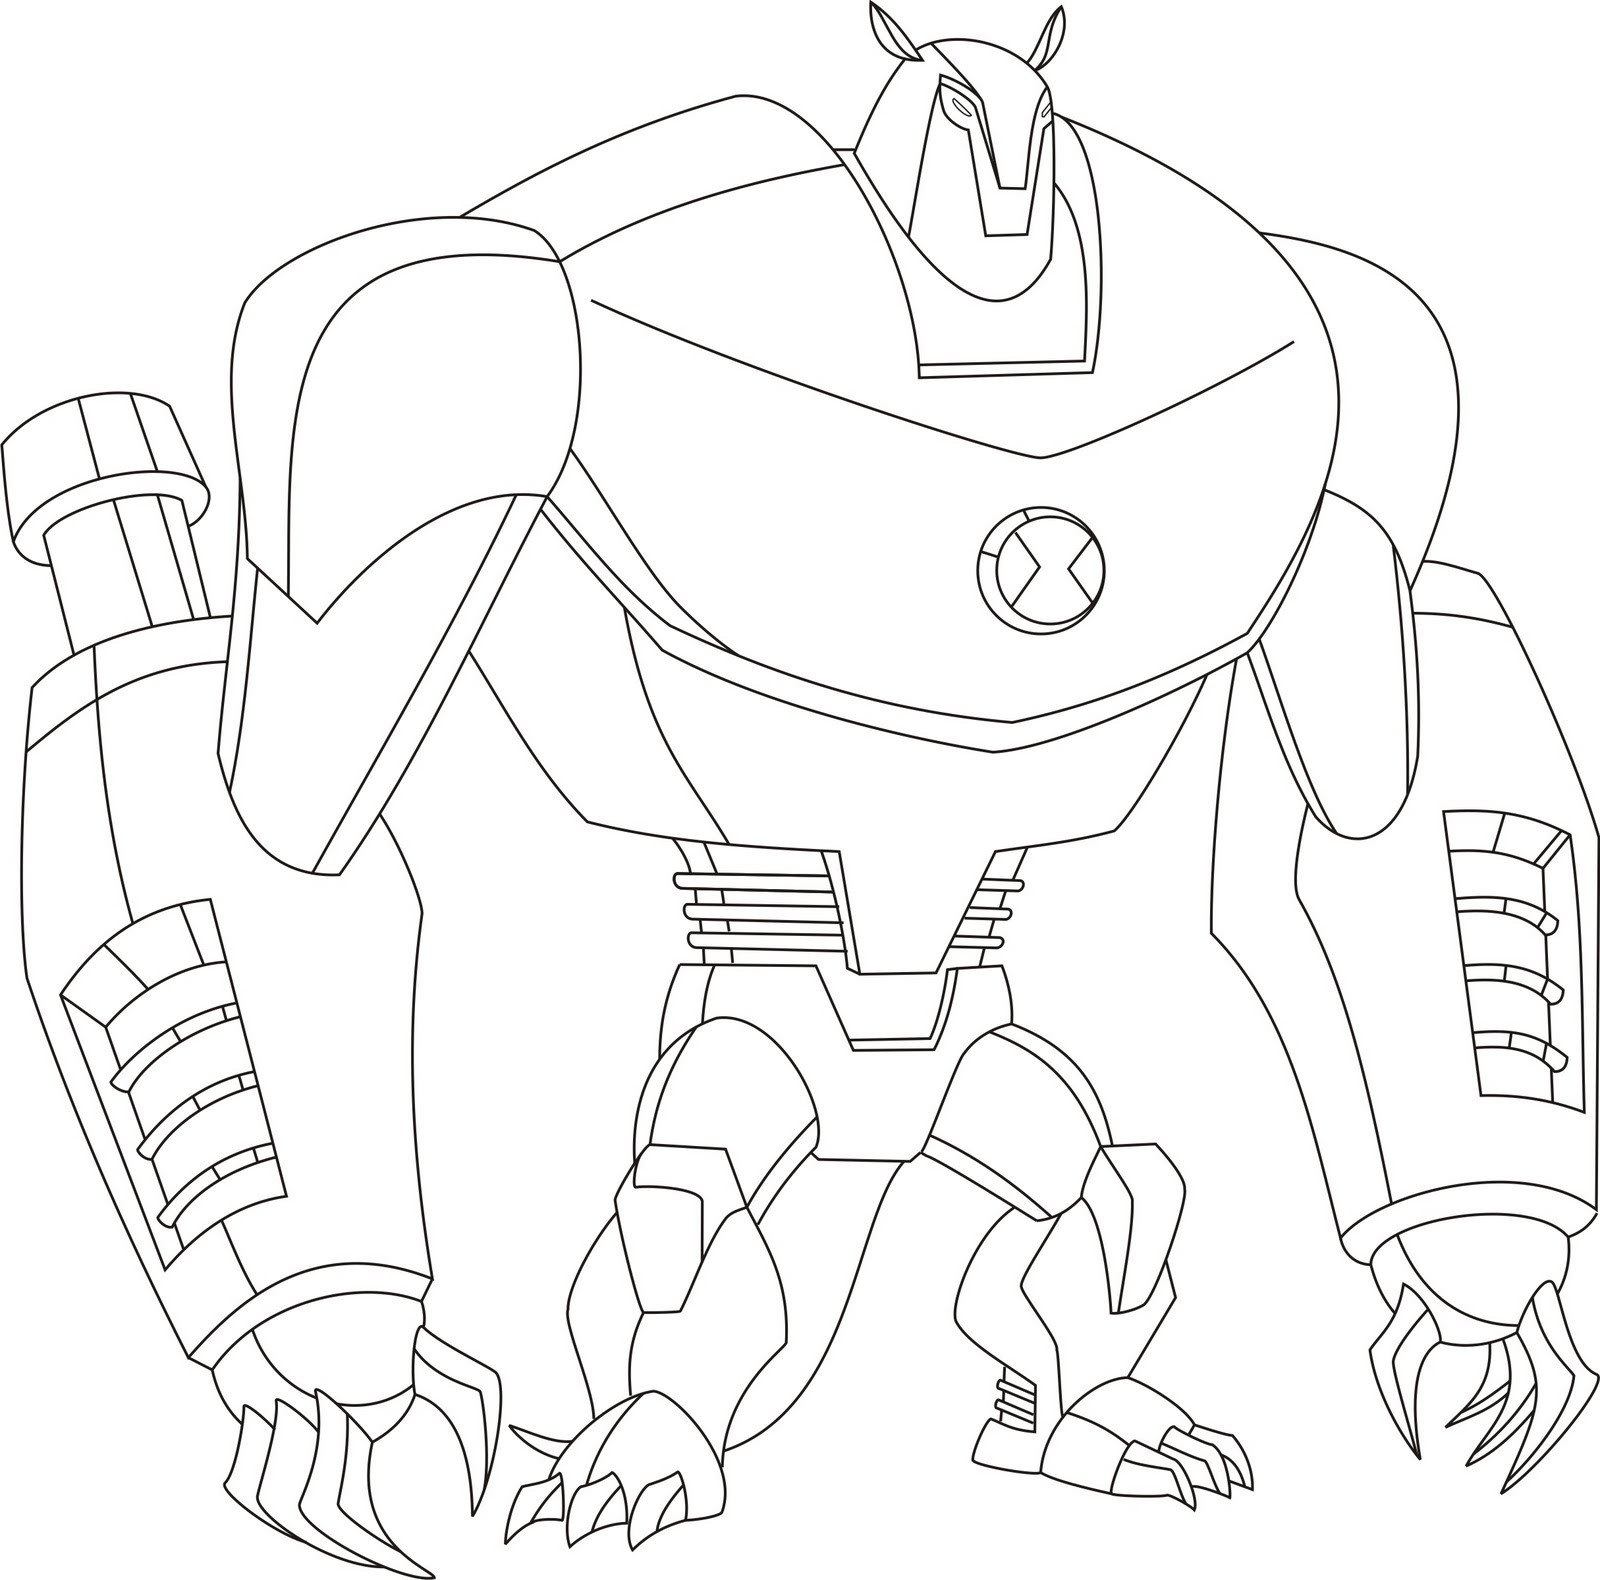 Coloring Sheets For Kids 10
 Free Printable Ben 10 Coloring Pages For Kids